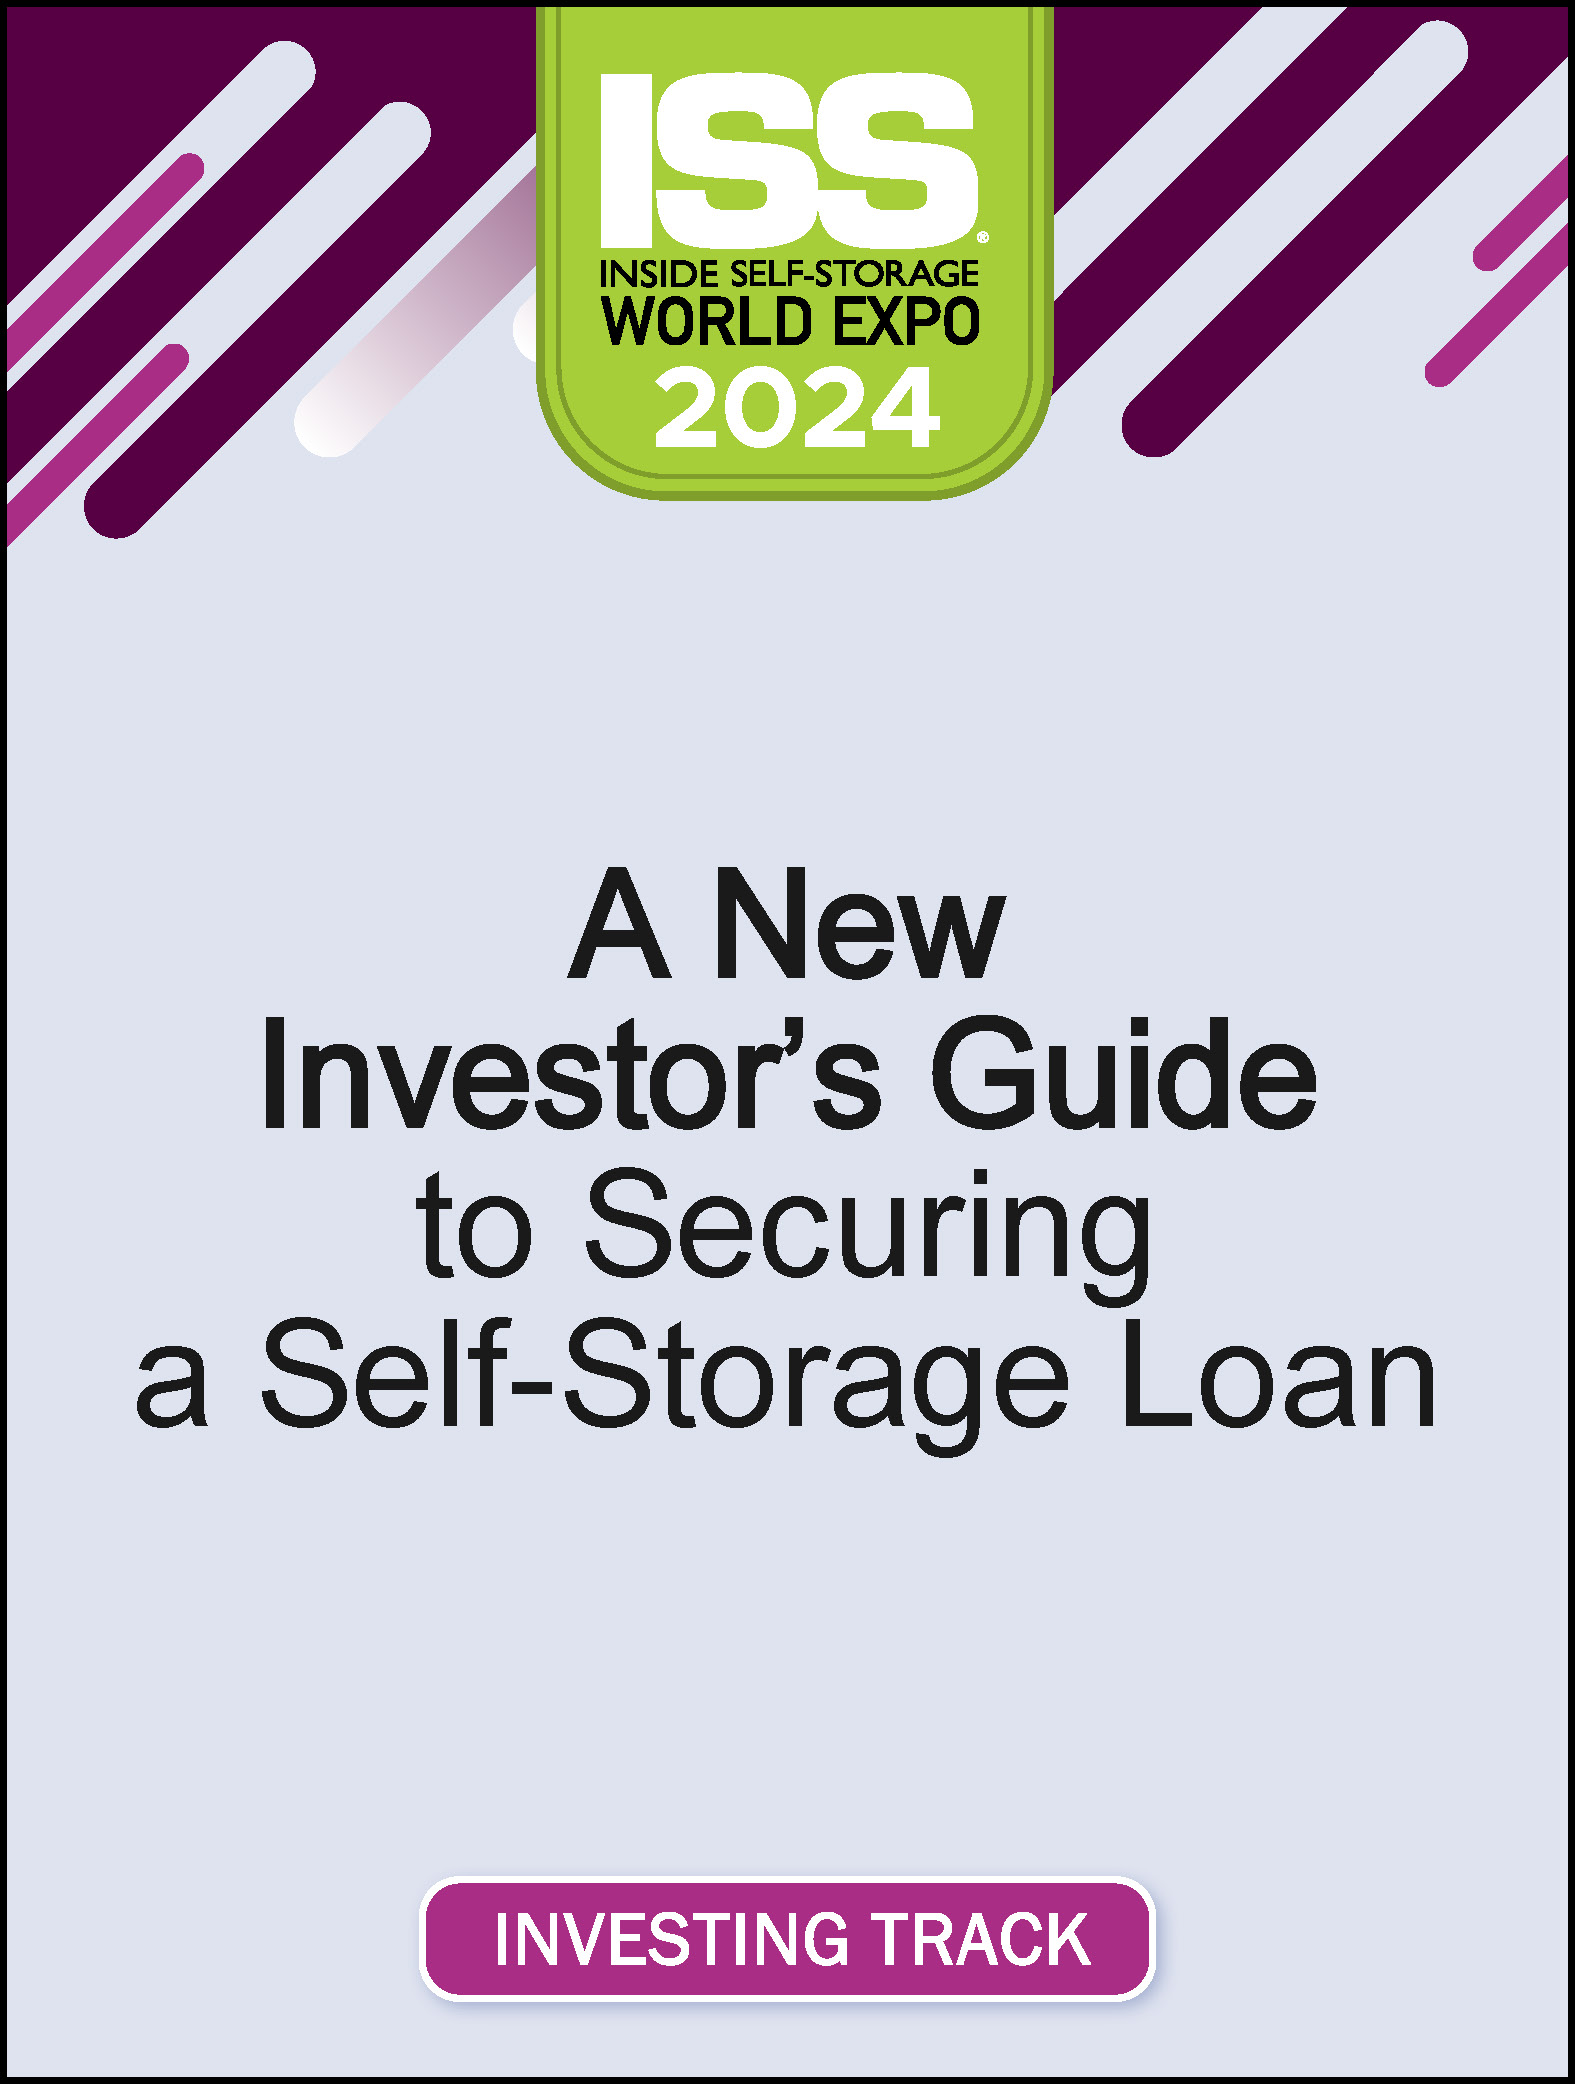 Video Pre-Order PDF - A New Investor’s Guide to Securing a Self-Storage Loan